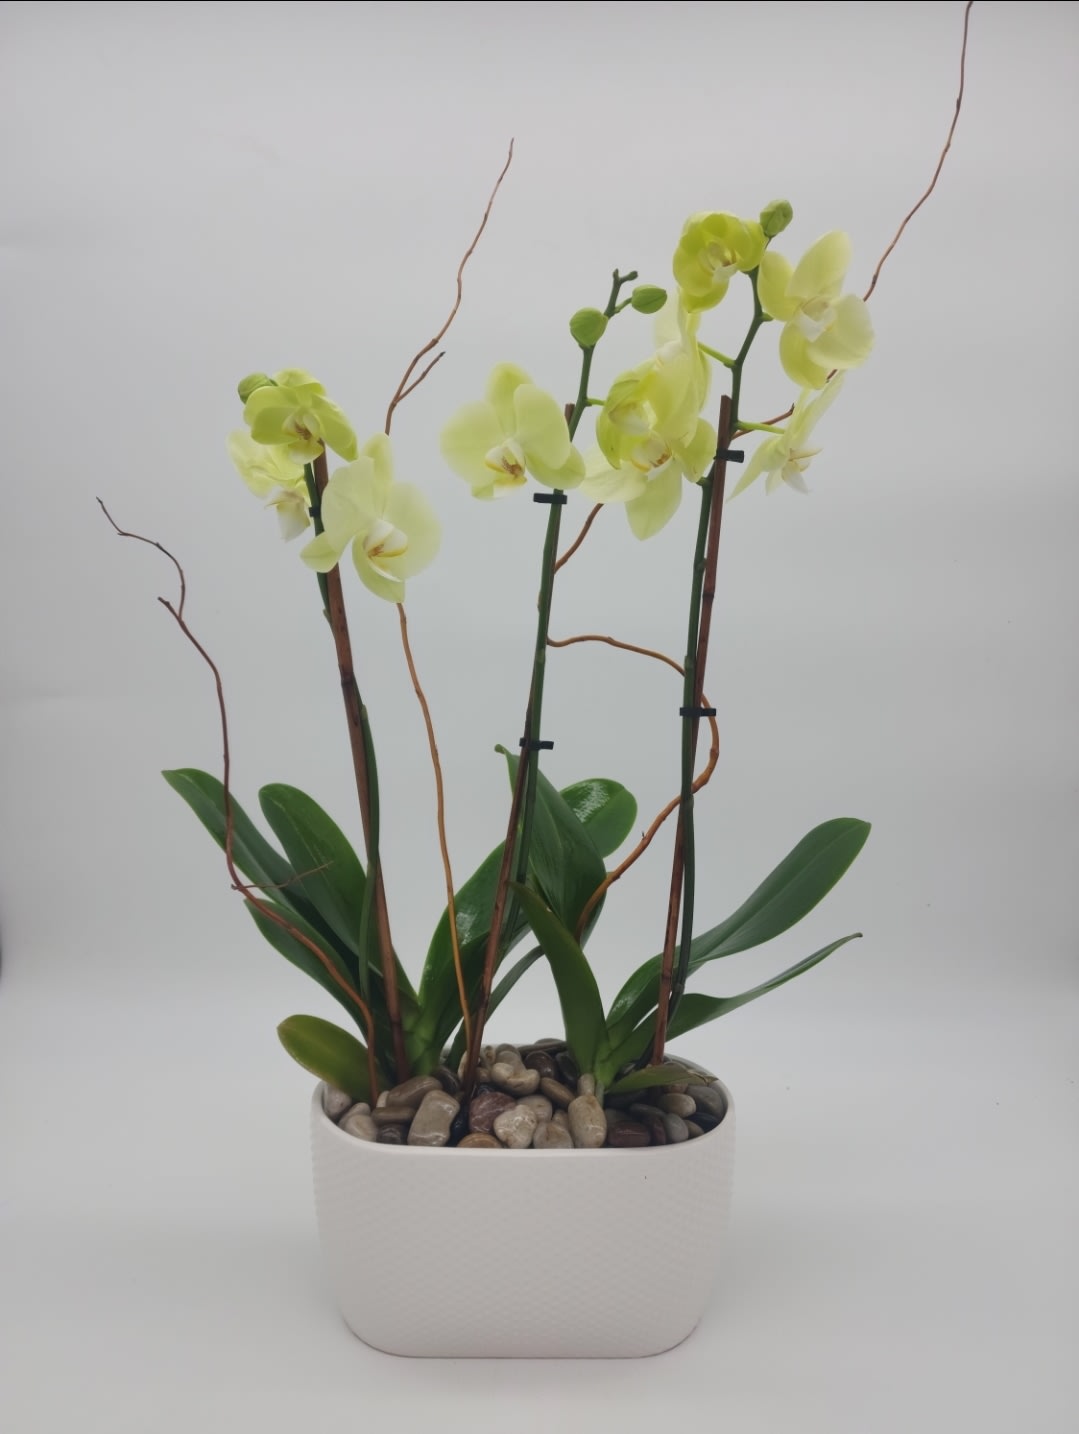 Double Orchid - What’s better than one white phalaenopsis orchid? Two of these beautiful orchid plants,  An elegant presentation, and an appropriate gift for any occasion. Available in many colors.